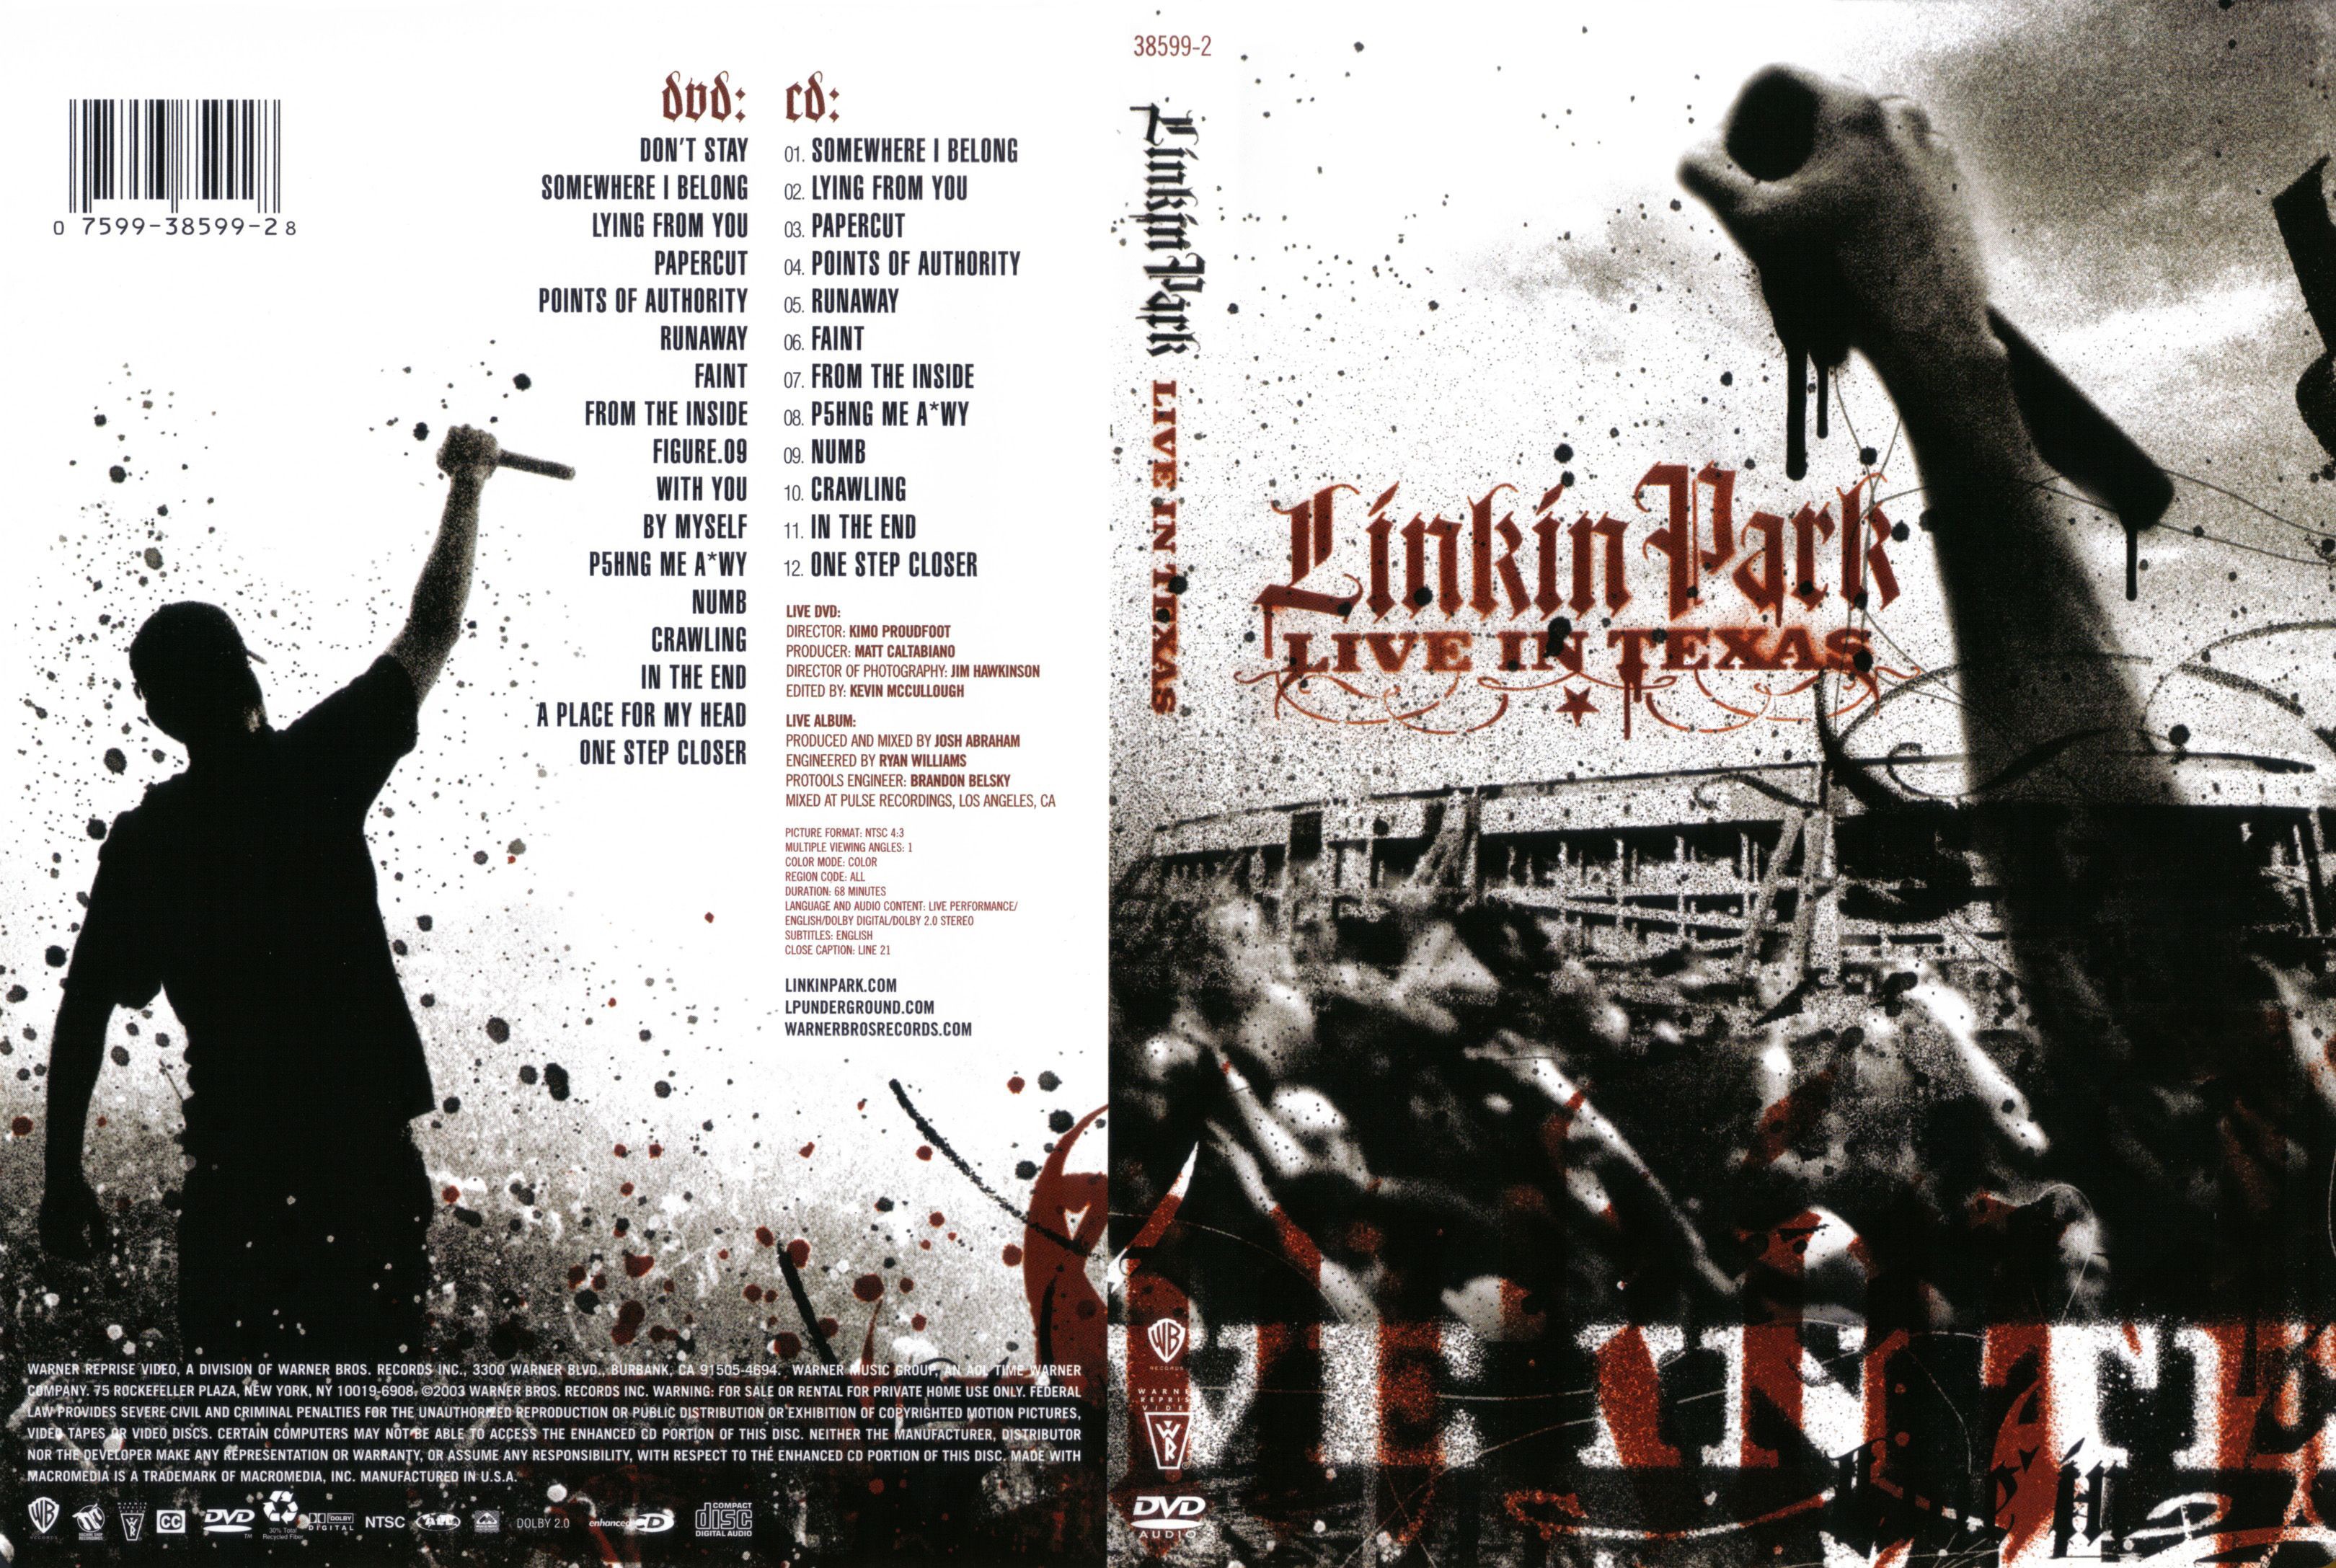 Jaquette DVD Linkin Park live in Texas